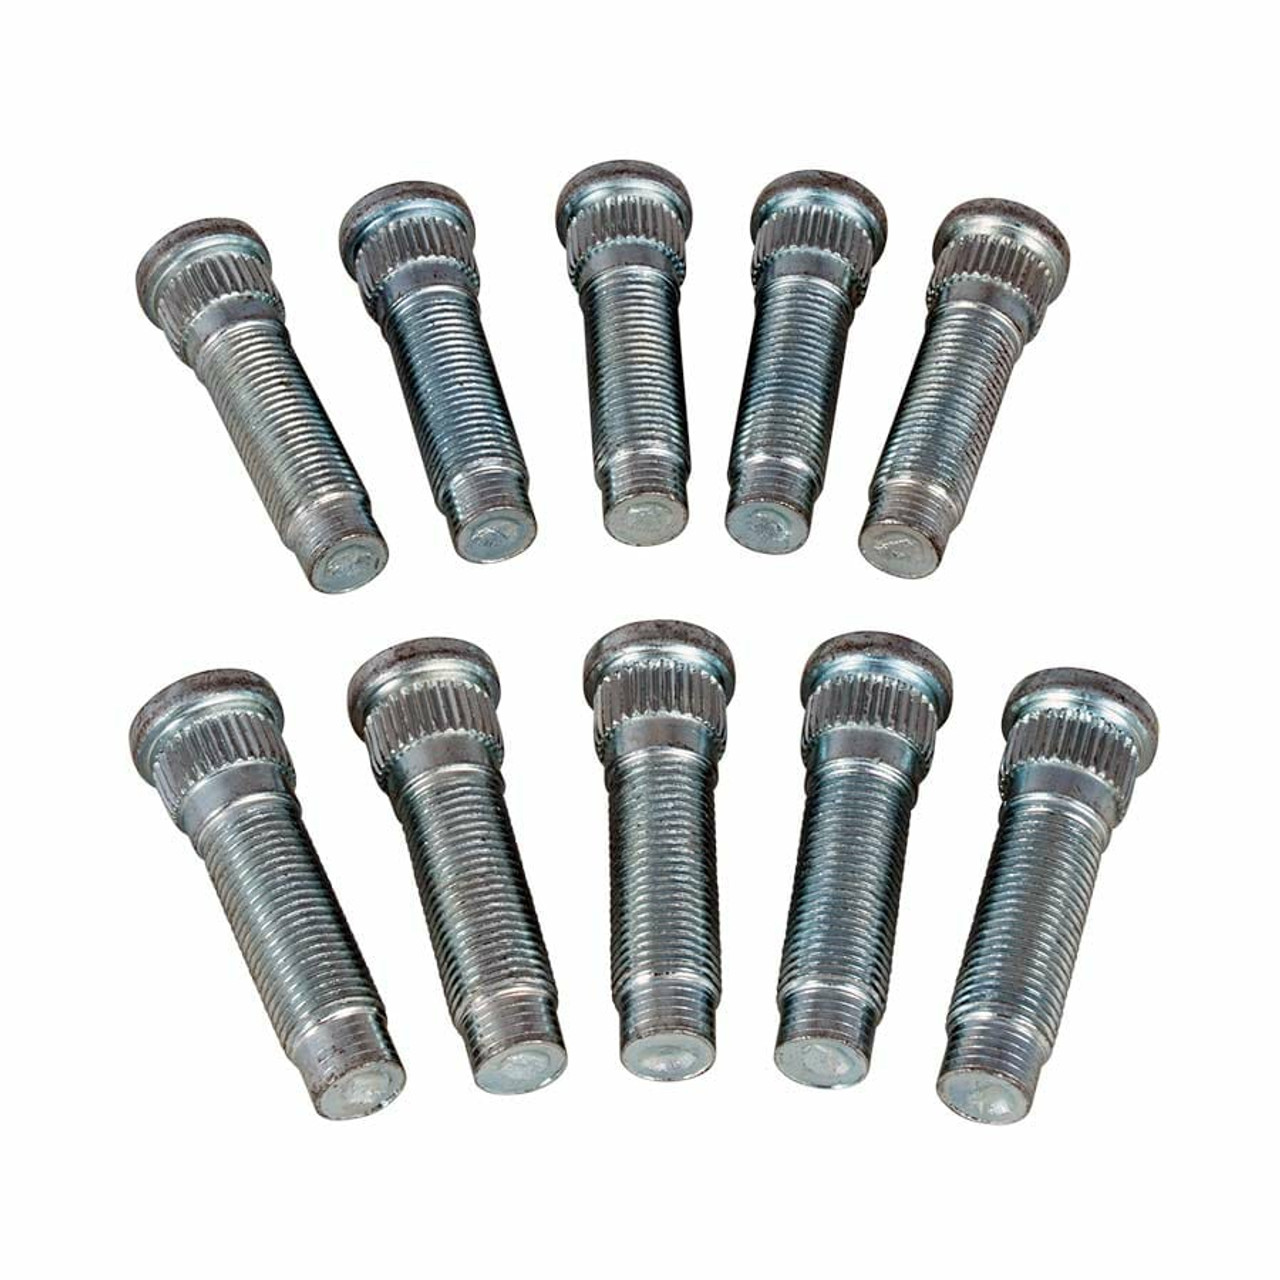 1994-2004 Mustang Wheel Studs 1/2-20 With .615" Knurl - 10 Pcs